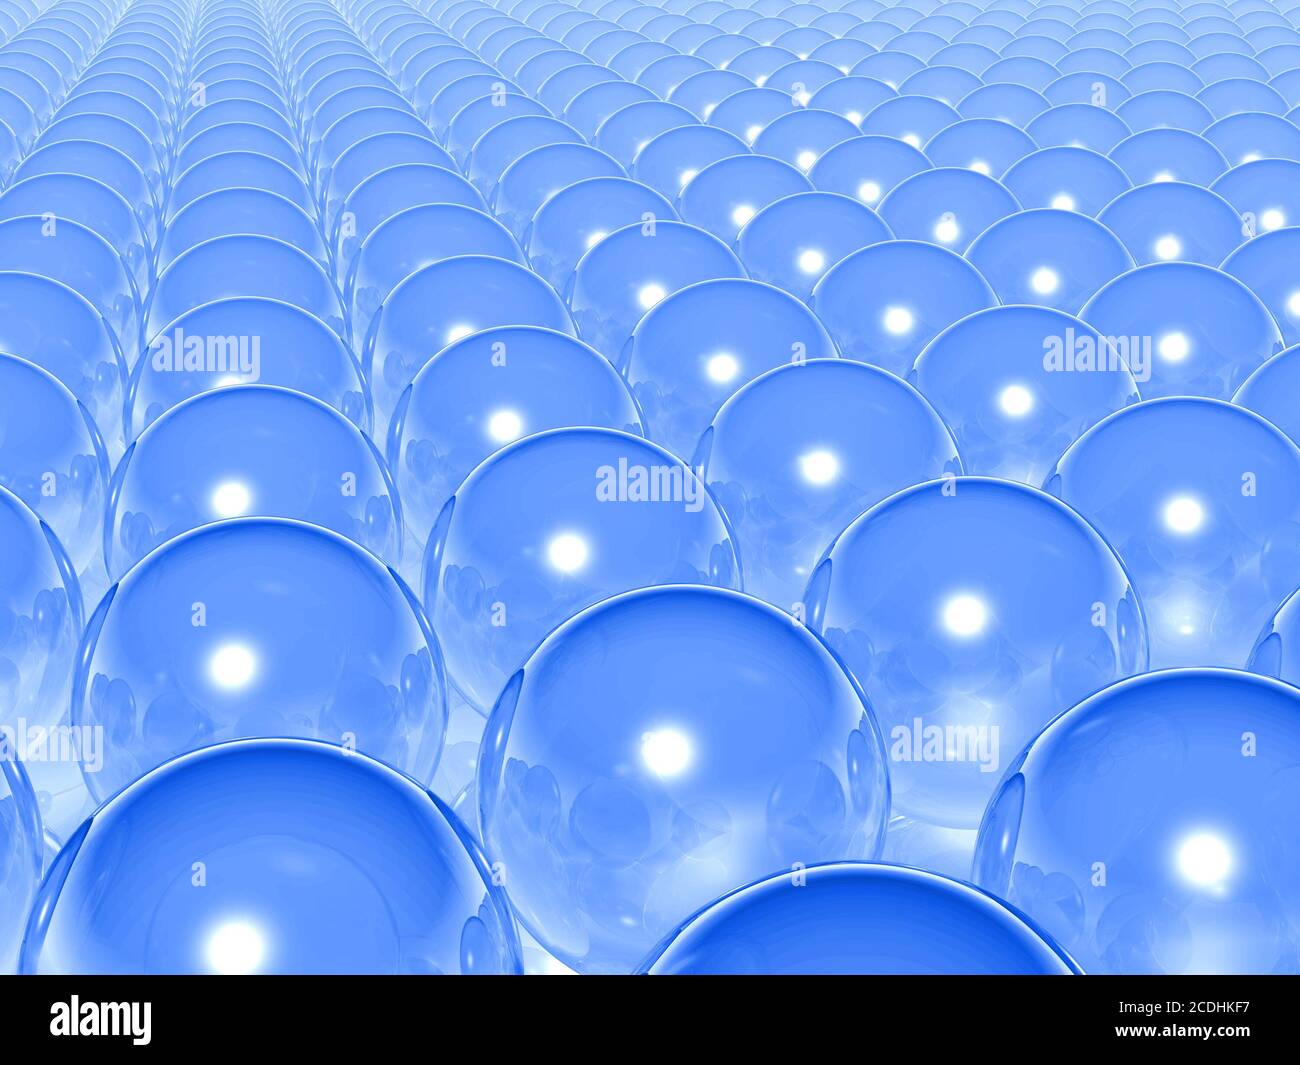 abstract blue transparent balls and their reflecti Stock Photo